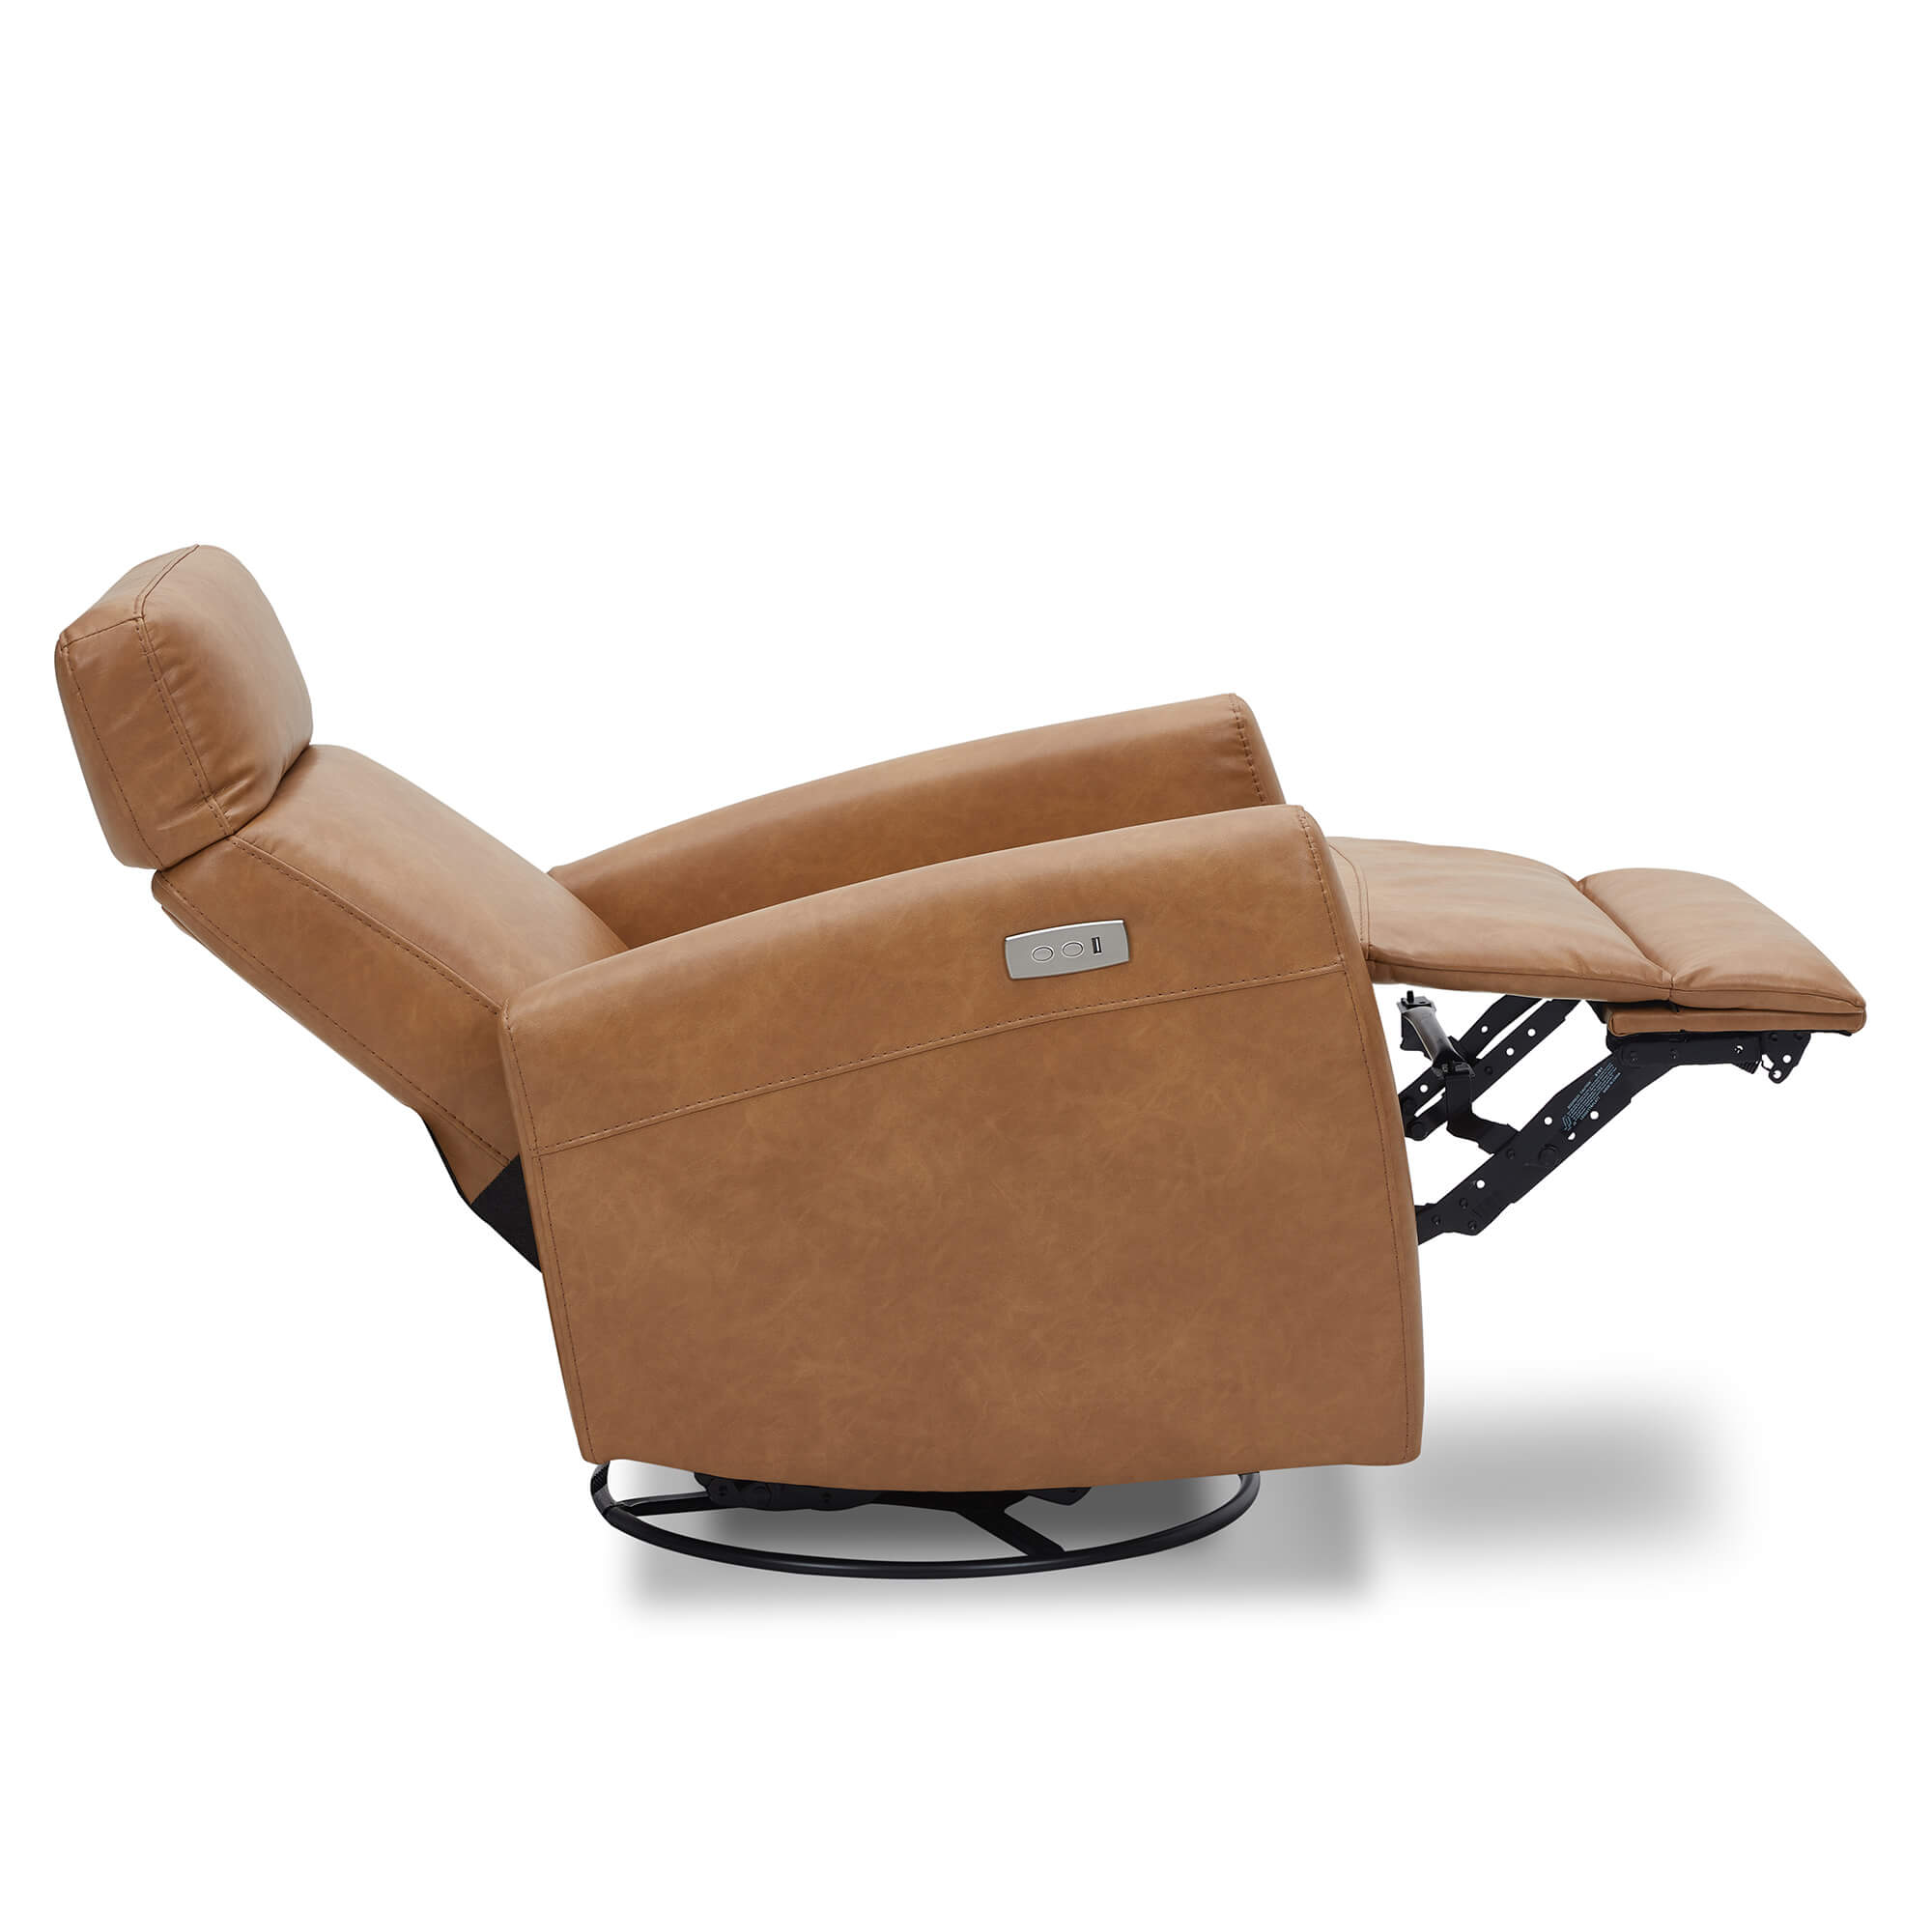 CHITA LIVING-Morees Power Swivel Glider Recliner with Headrest-Recliners-Faux Leather-Cognac Brown-